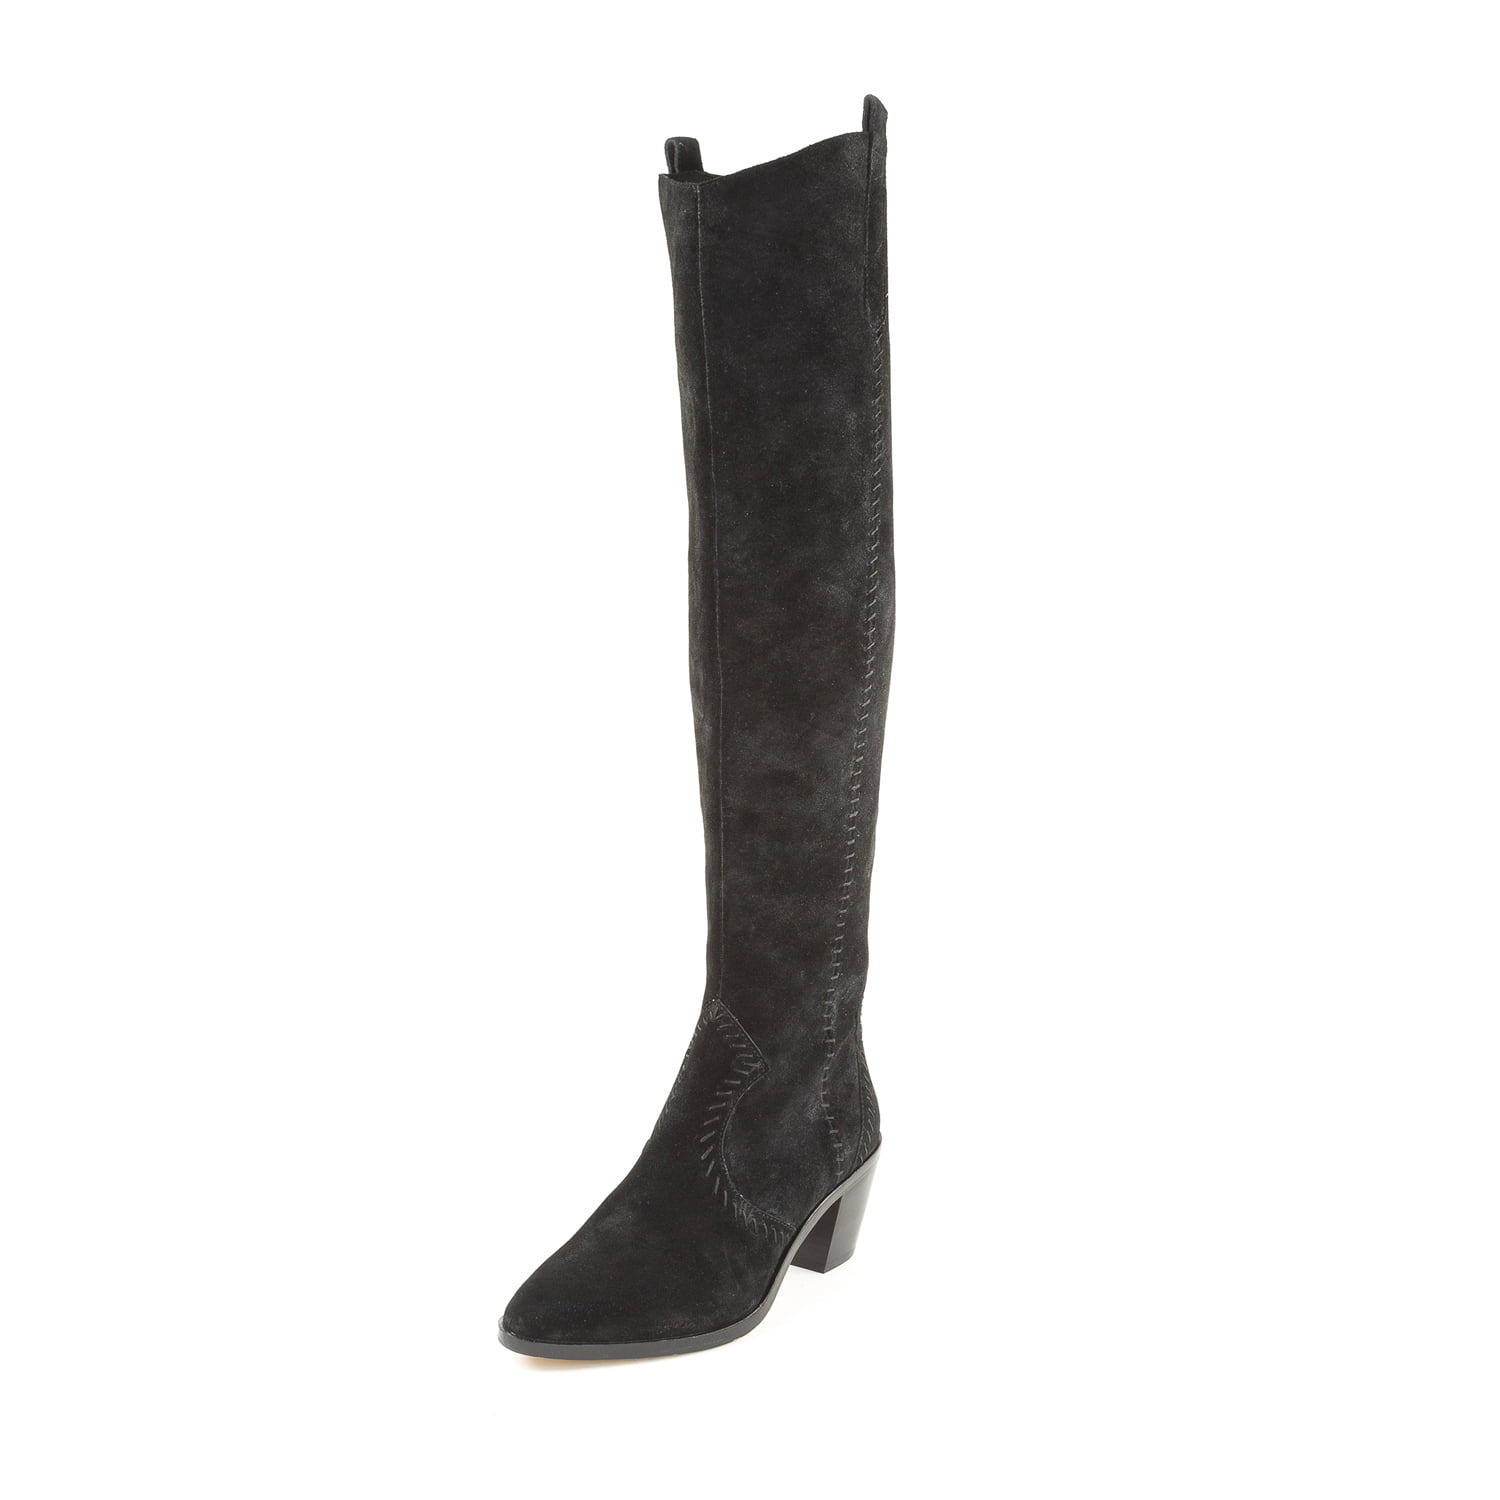 Rebecca Minkoff Women's Lizelle Suede Over-The-Knee Boots US 5 Black ...